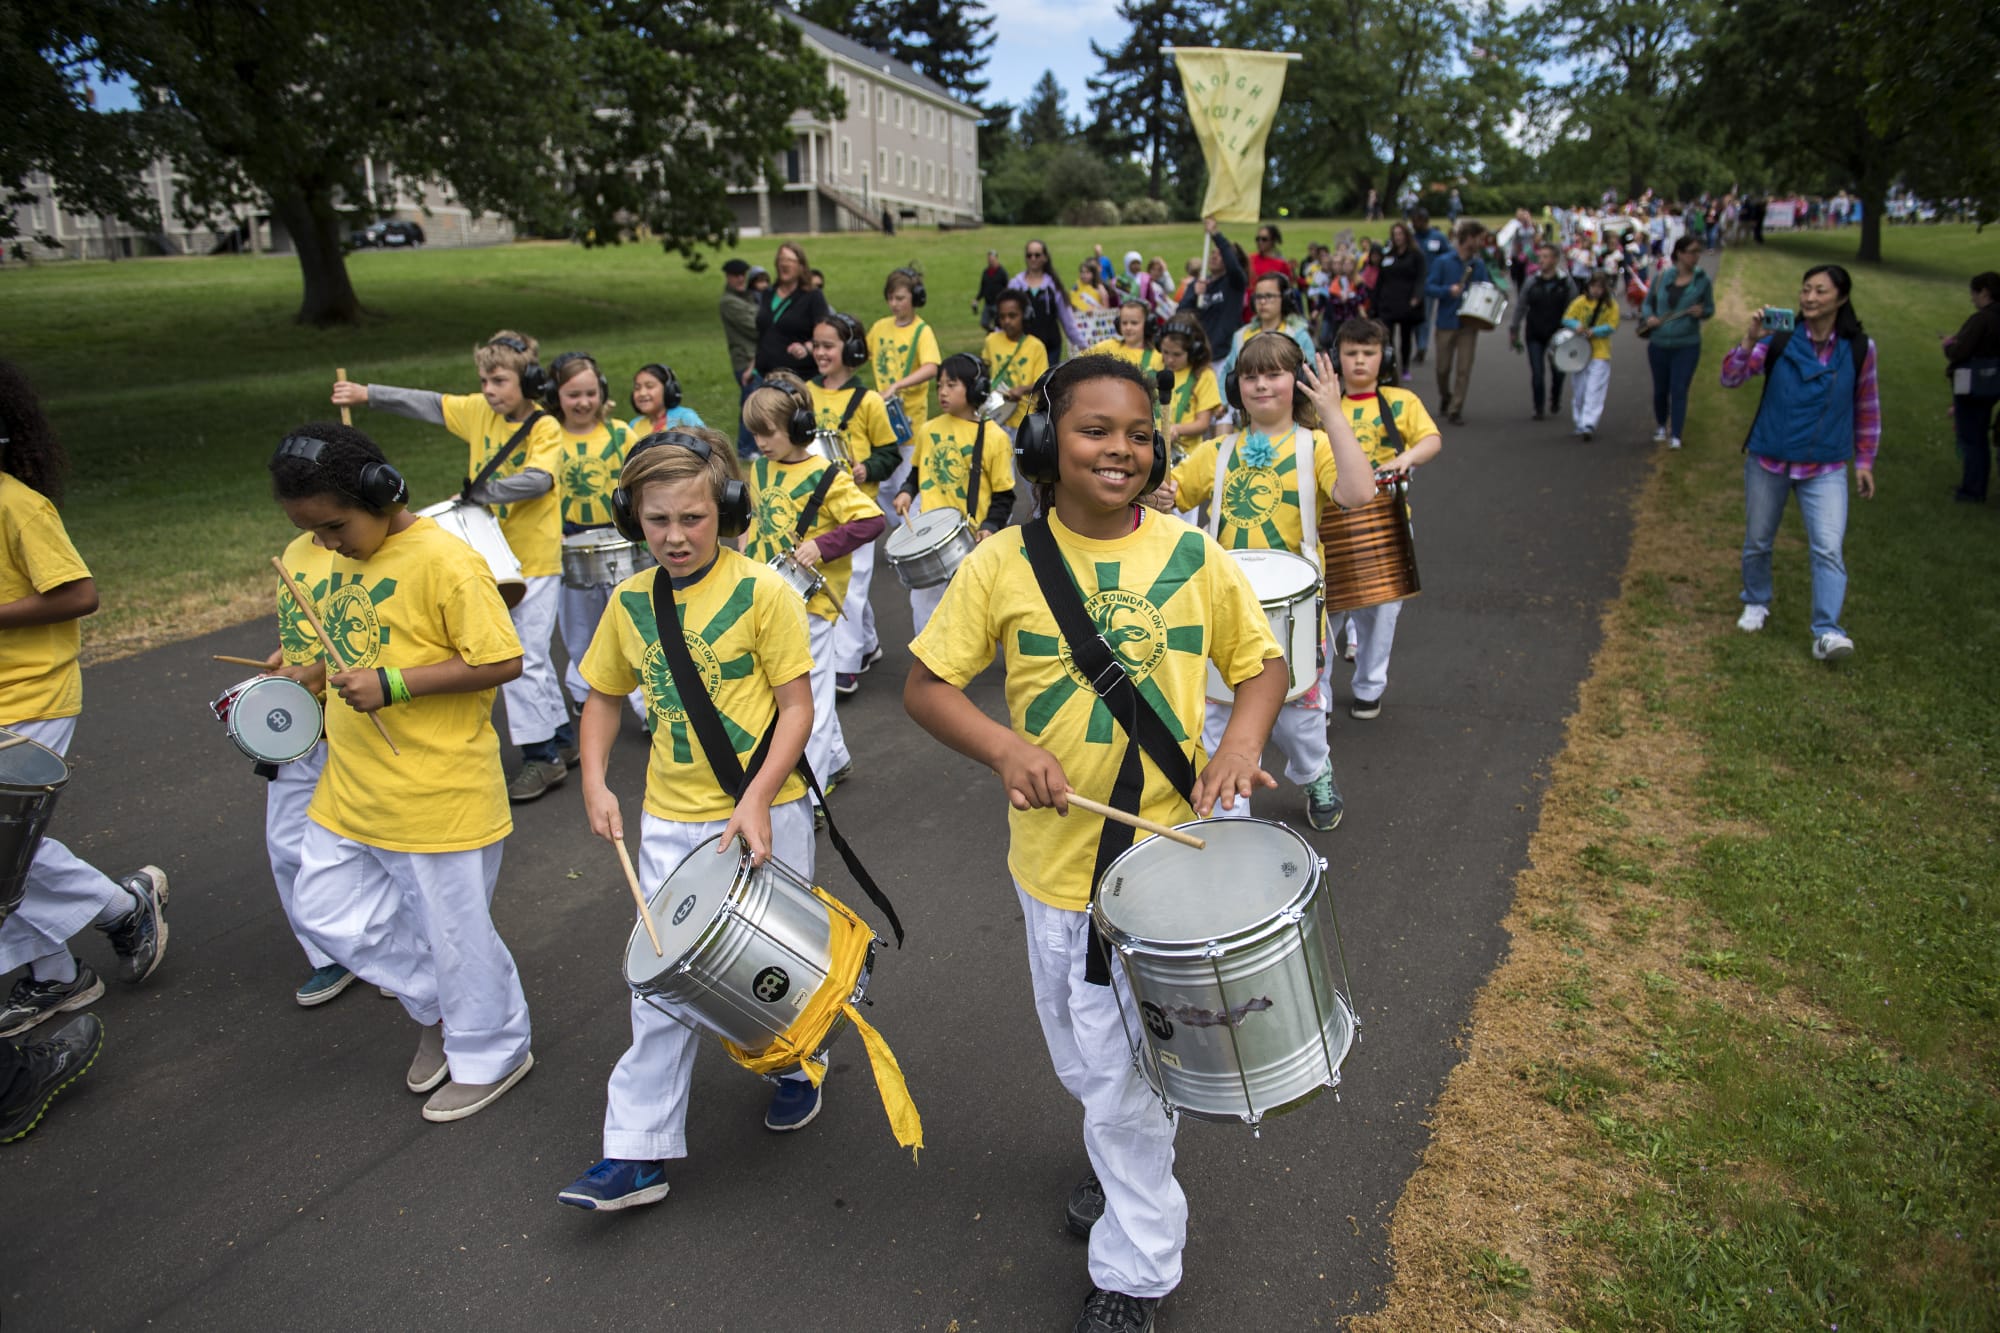 The Hough Elementary School after school program Youth Escola de Samba drum and march together during the Children's Cultural Parade at Fort Vancouver National Historic Site on Friday. The National Park Service, the Evergreen School District, and the Vancouver School District came together for the annual event to support local students and celebrate the region's historical diversity.